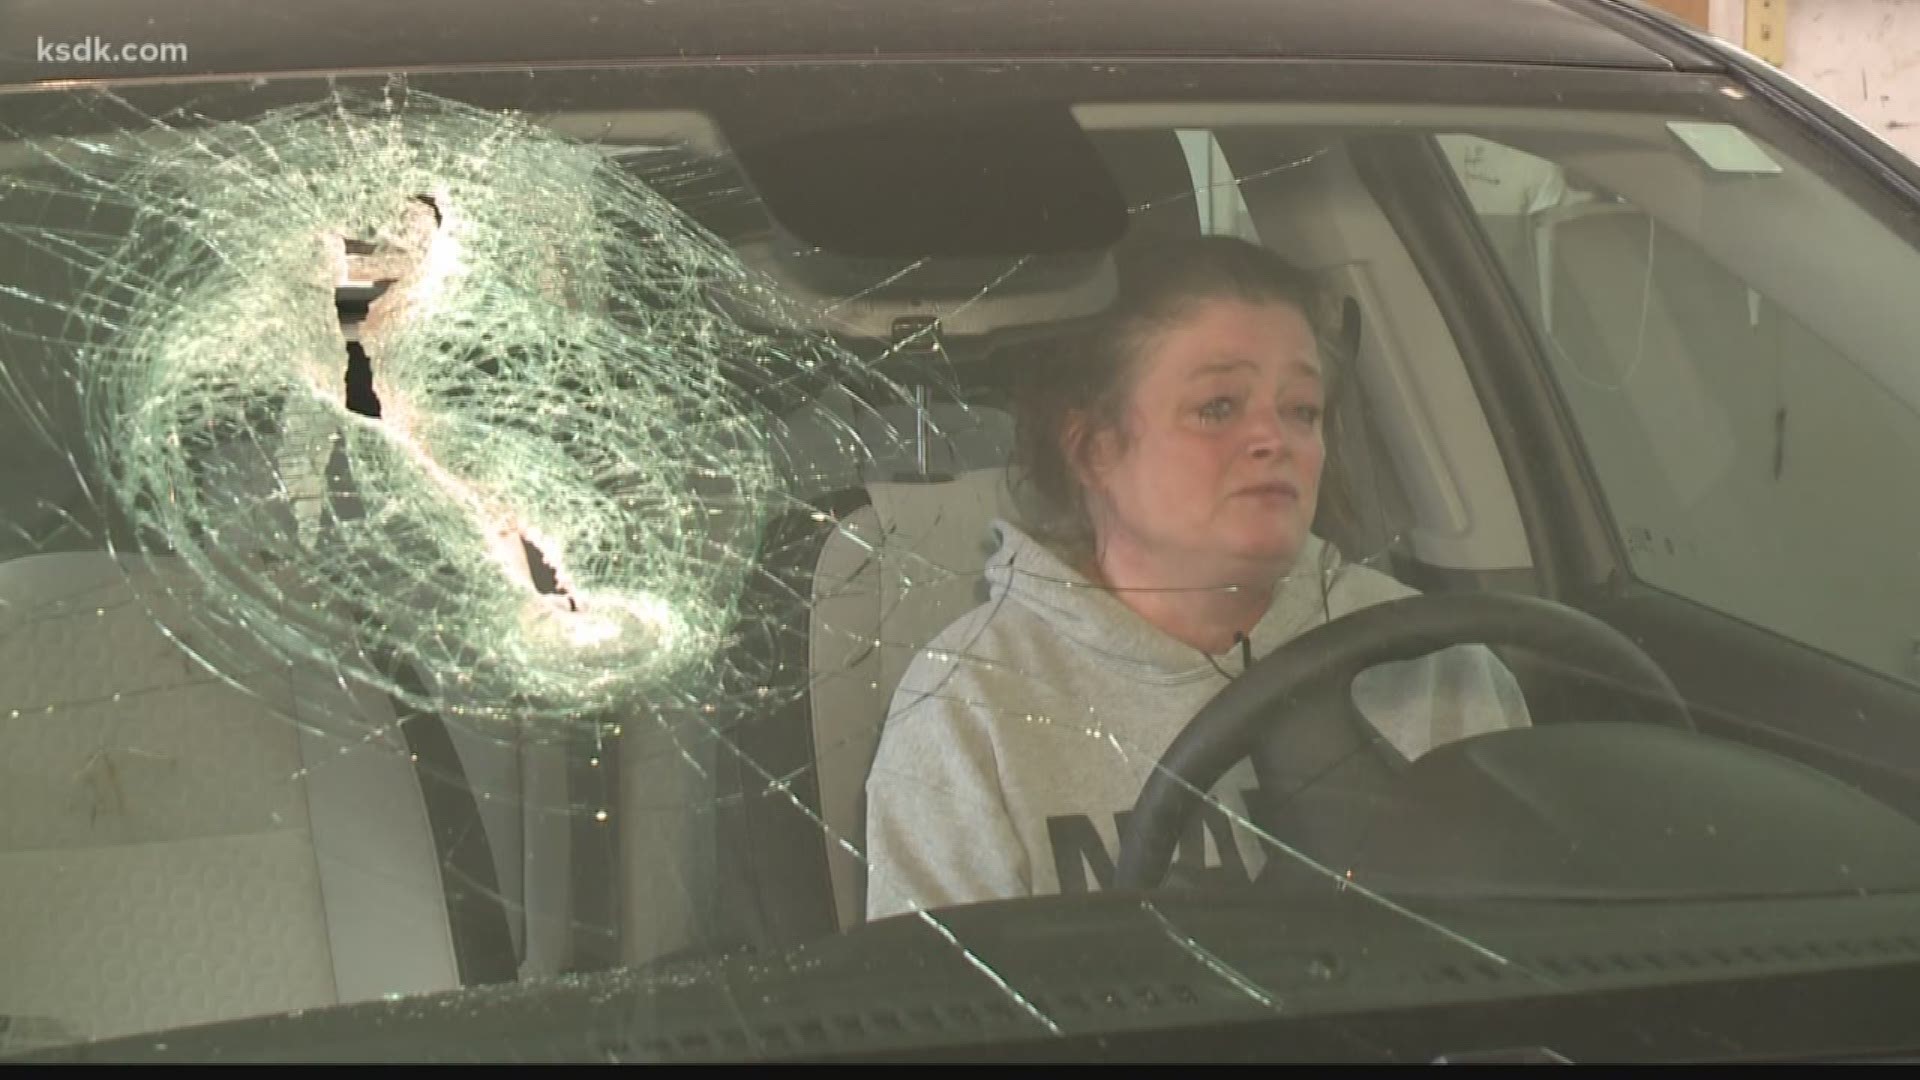 She was driving her granddaughter the windshield was smashed by something we probably drive over every day.